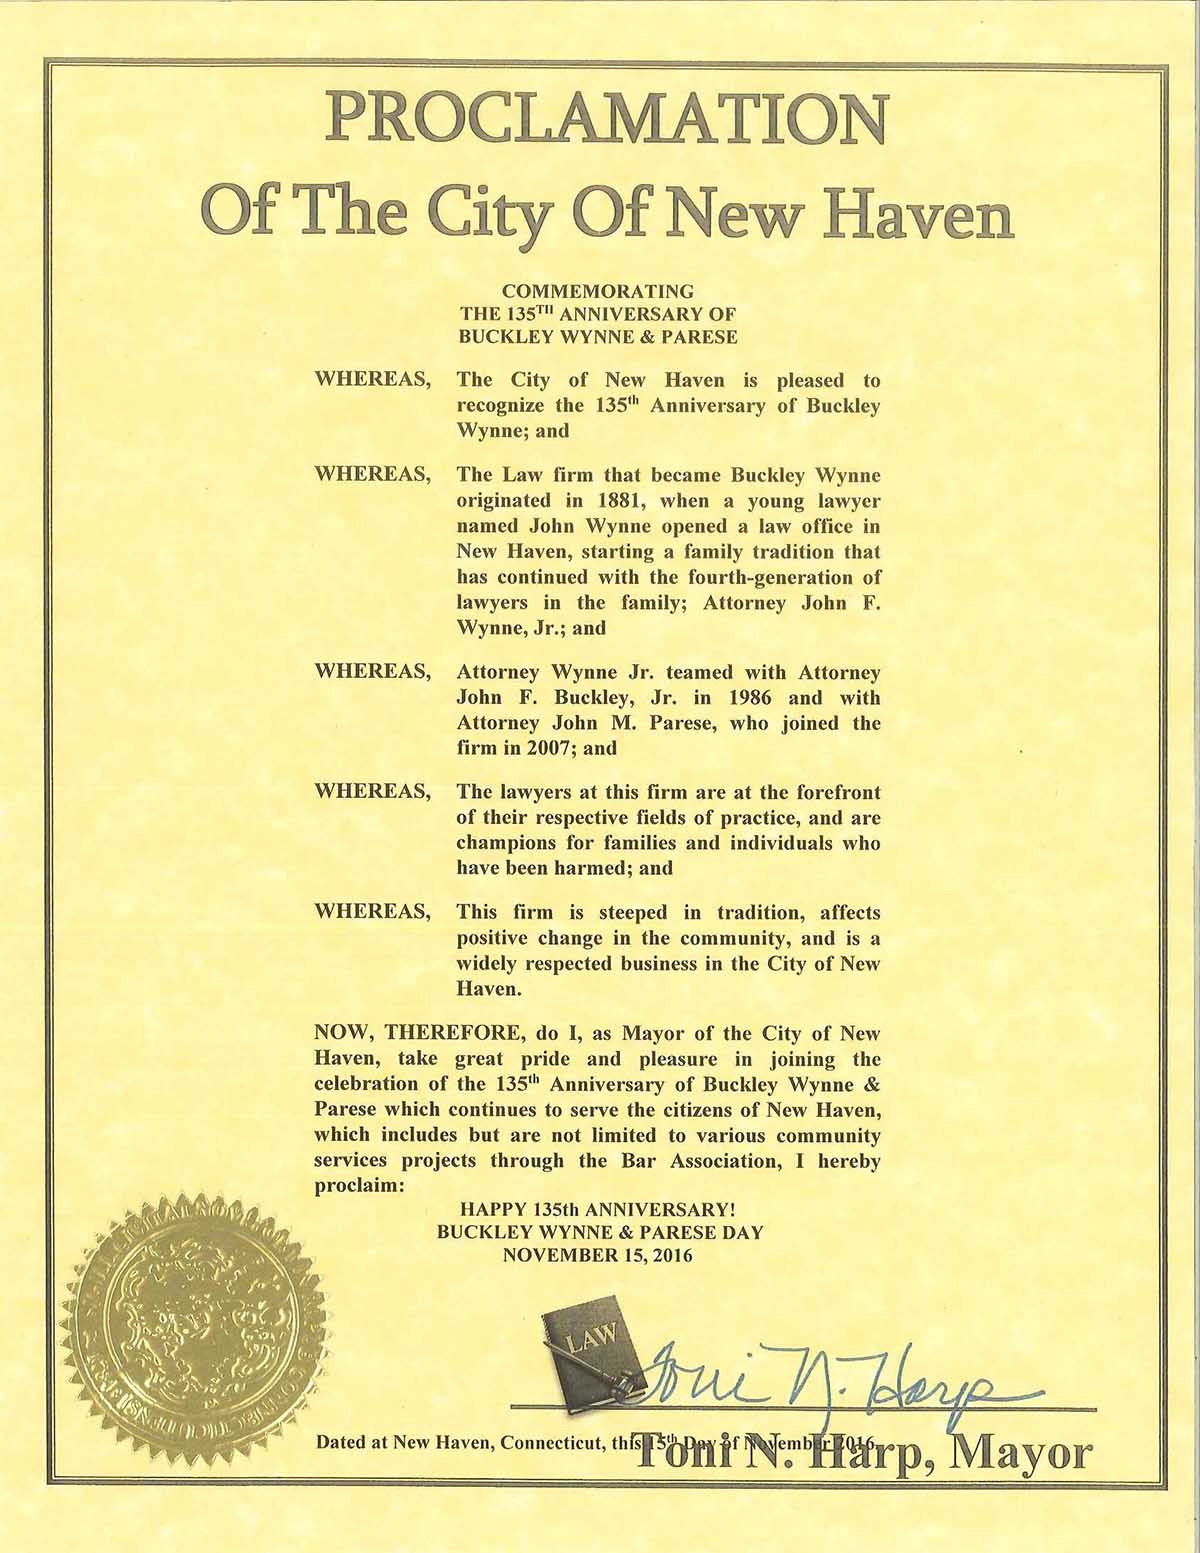 Proclamation of the City of New Haven BWP Day